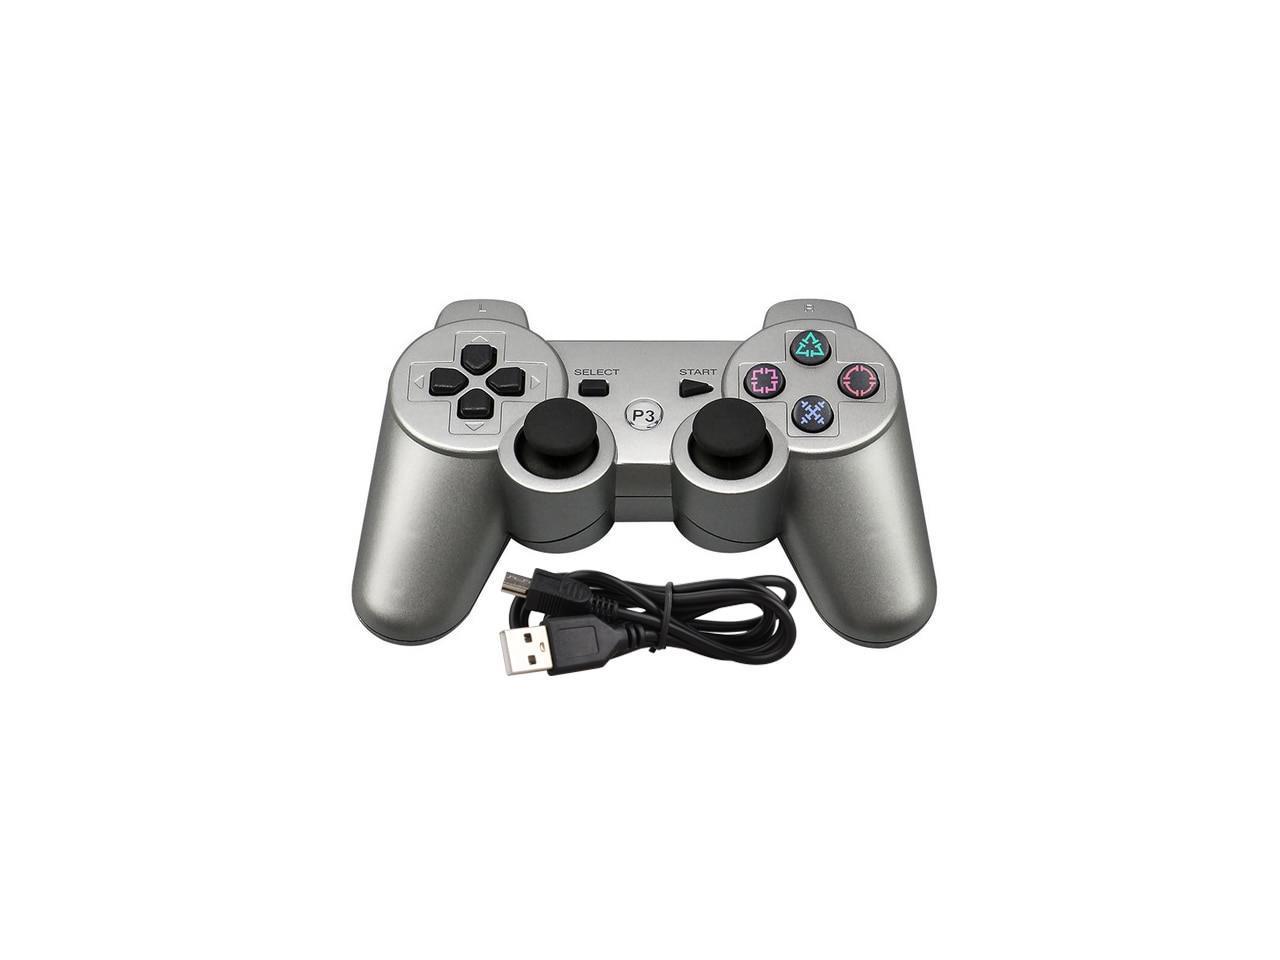 For PS3 USB Wired Controller For PS3 Gamepad for Play Station 3 Joystick gamepad Console for Sony Playstation 3 Controle